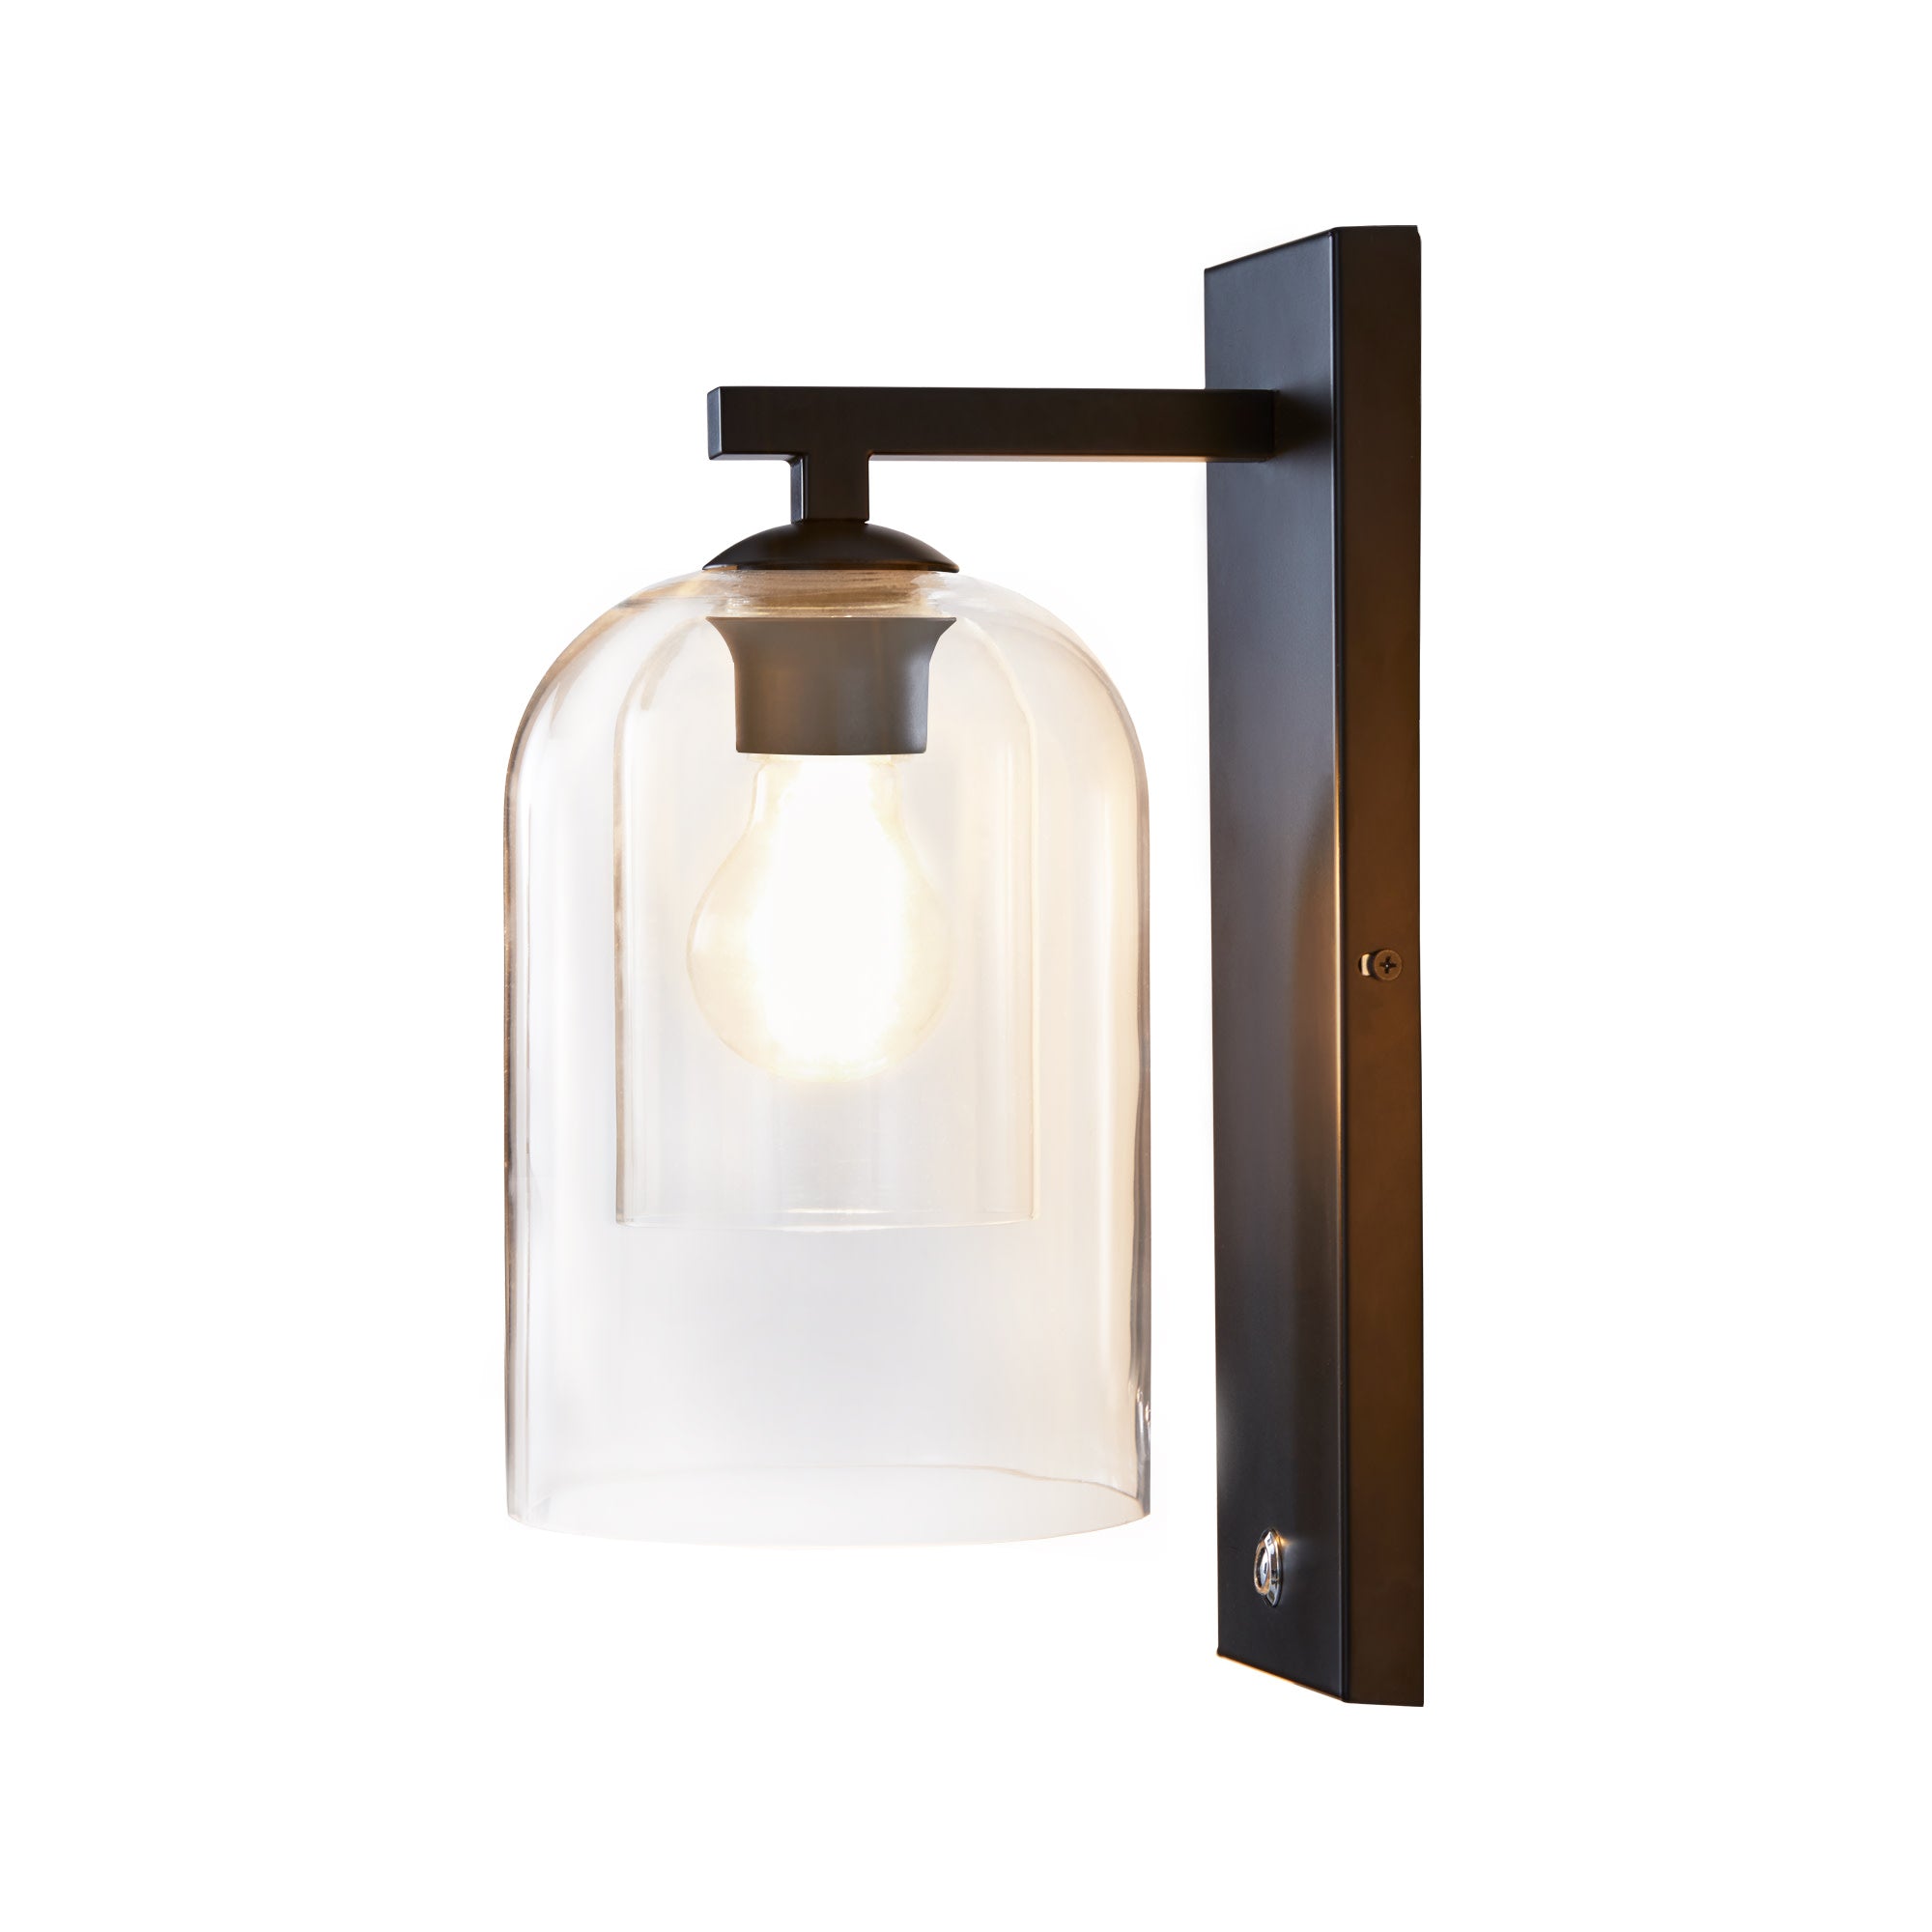 Teamson Home 1-Light Modern 13 1/2" High Wall Sconce with Clear Double Glass Dome Shade, Matte Black